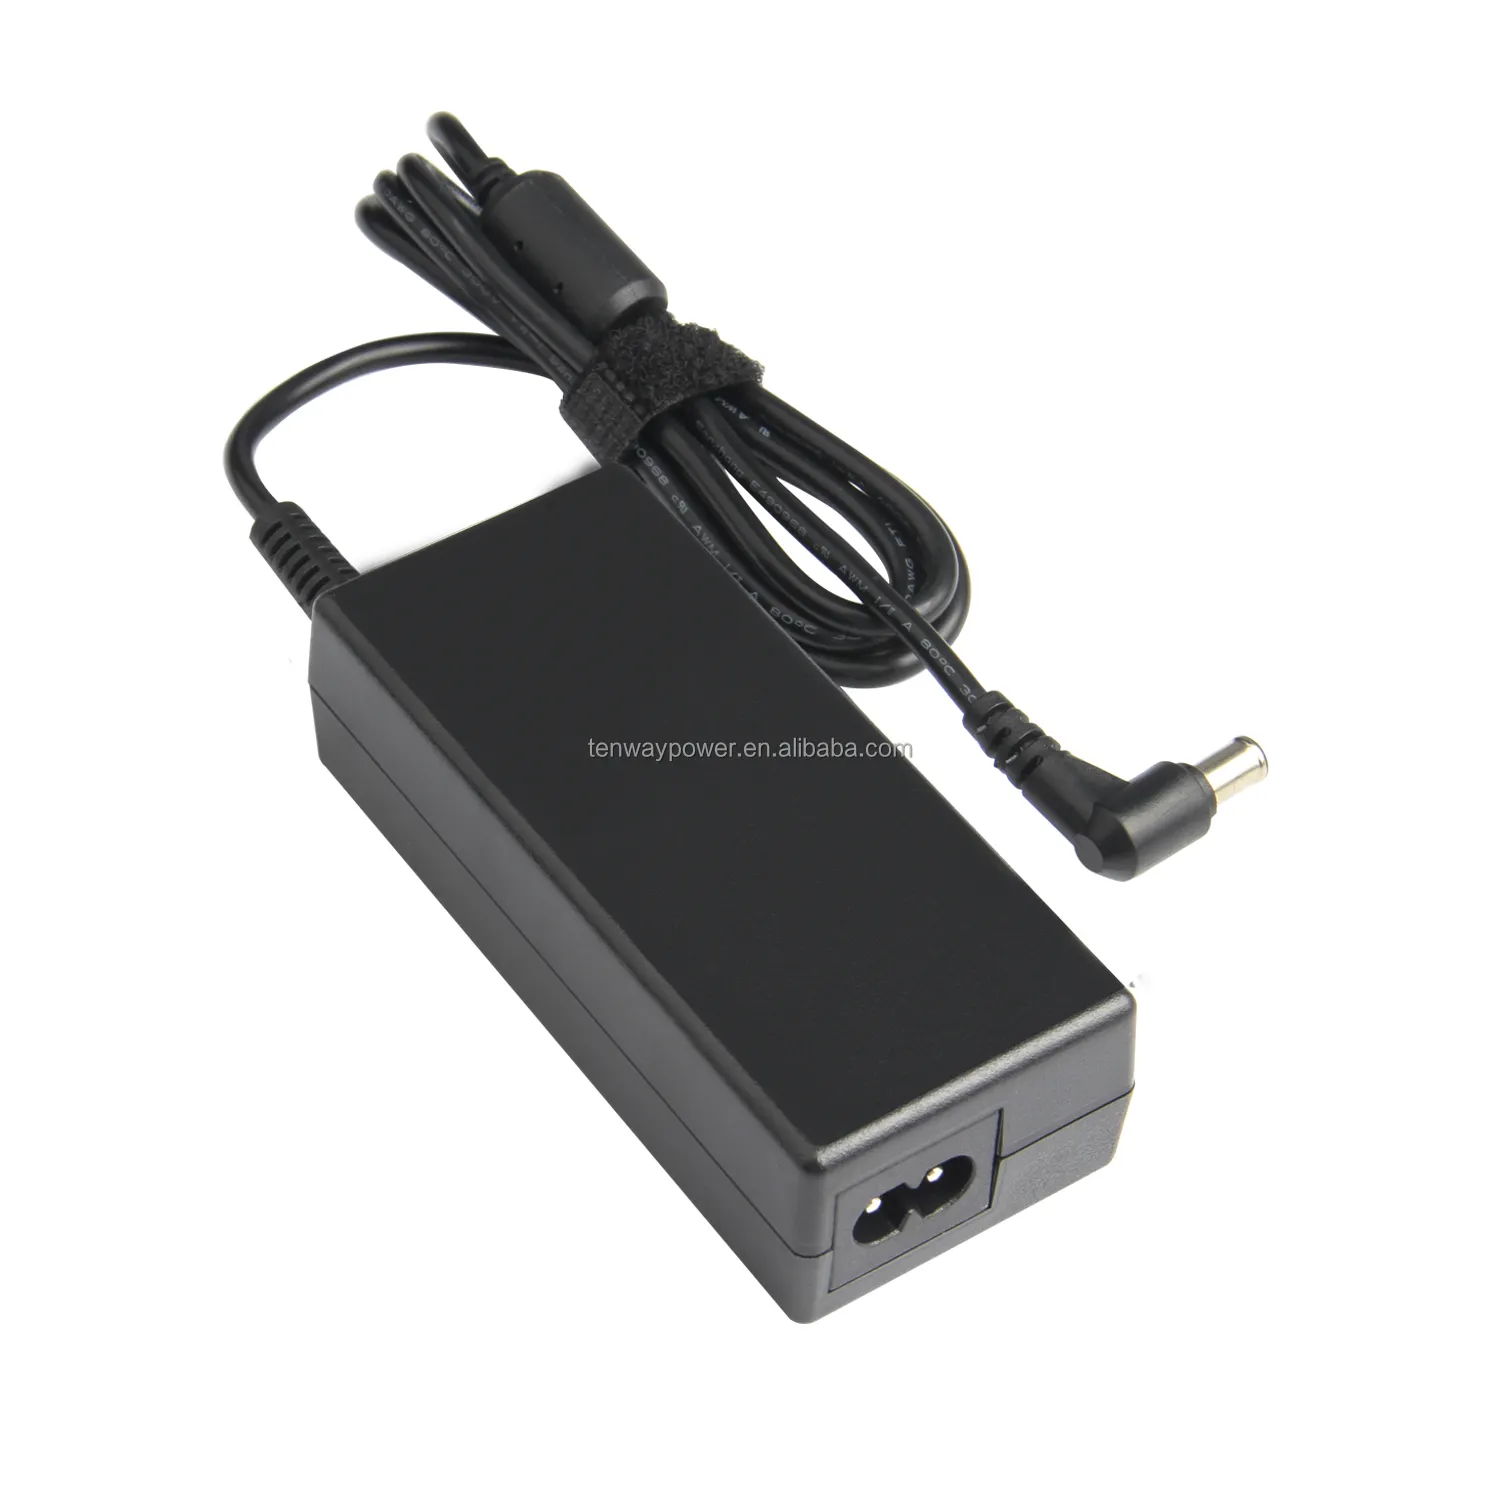 16V 4A 5.5*2.5*10mm Laptop AC Adapter For ACER Lenovo ASUS DELTA TOSHIBA Laptops